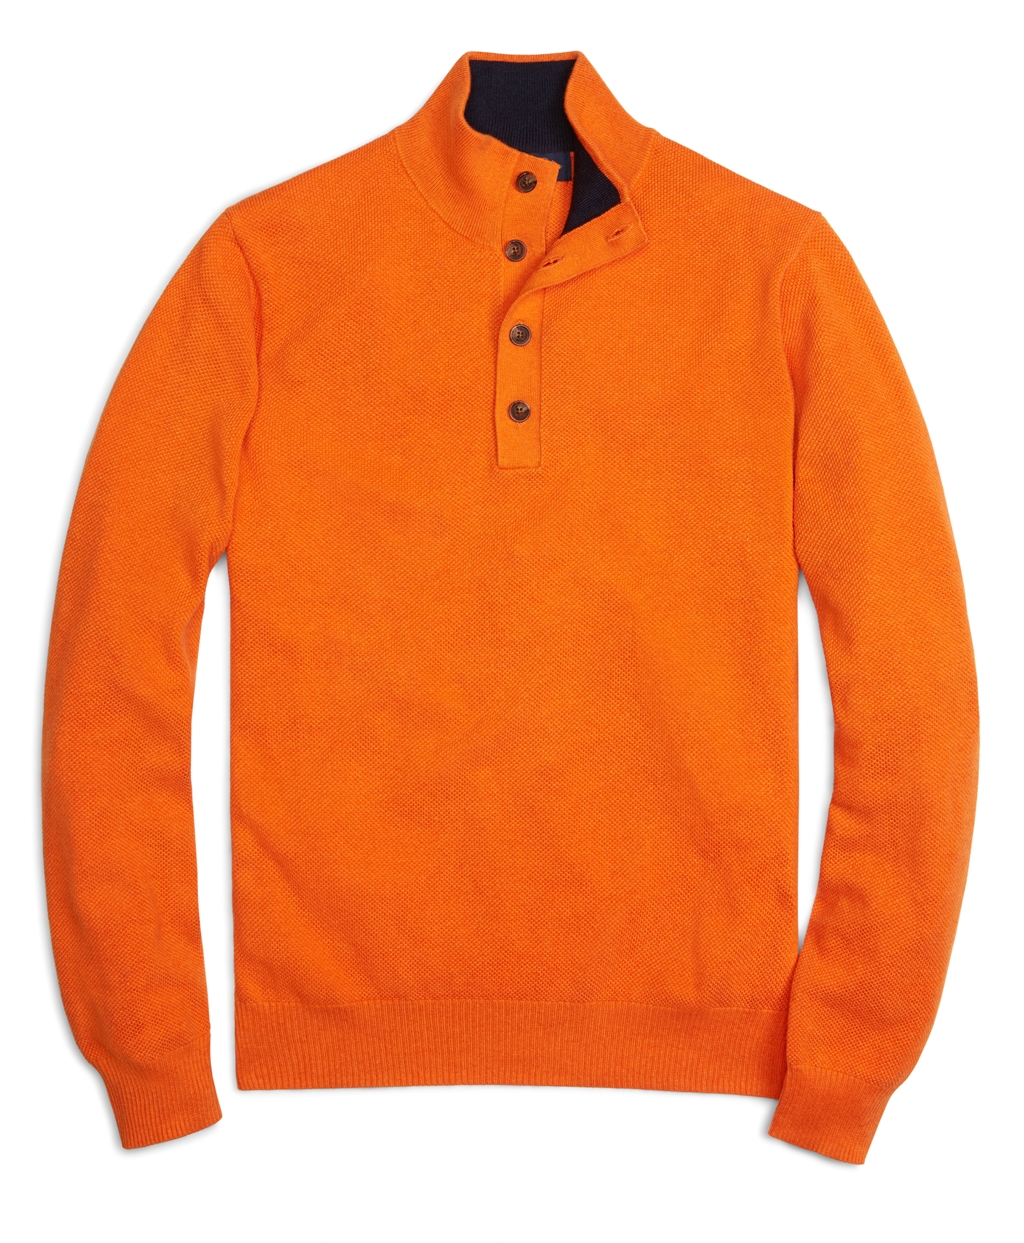 Download Lyst - Brooks Brothers Cotton Cashmere Button Mock Neck ...